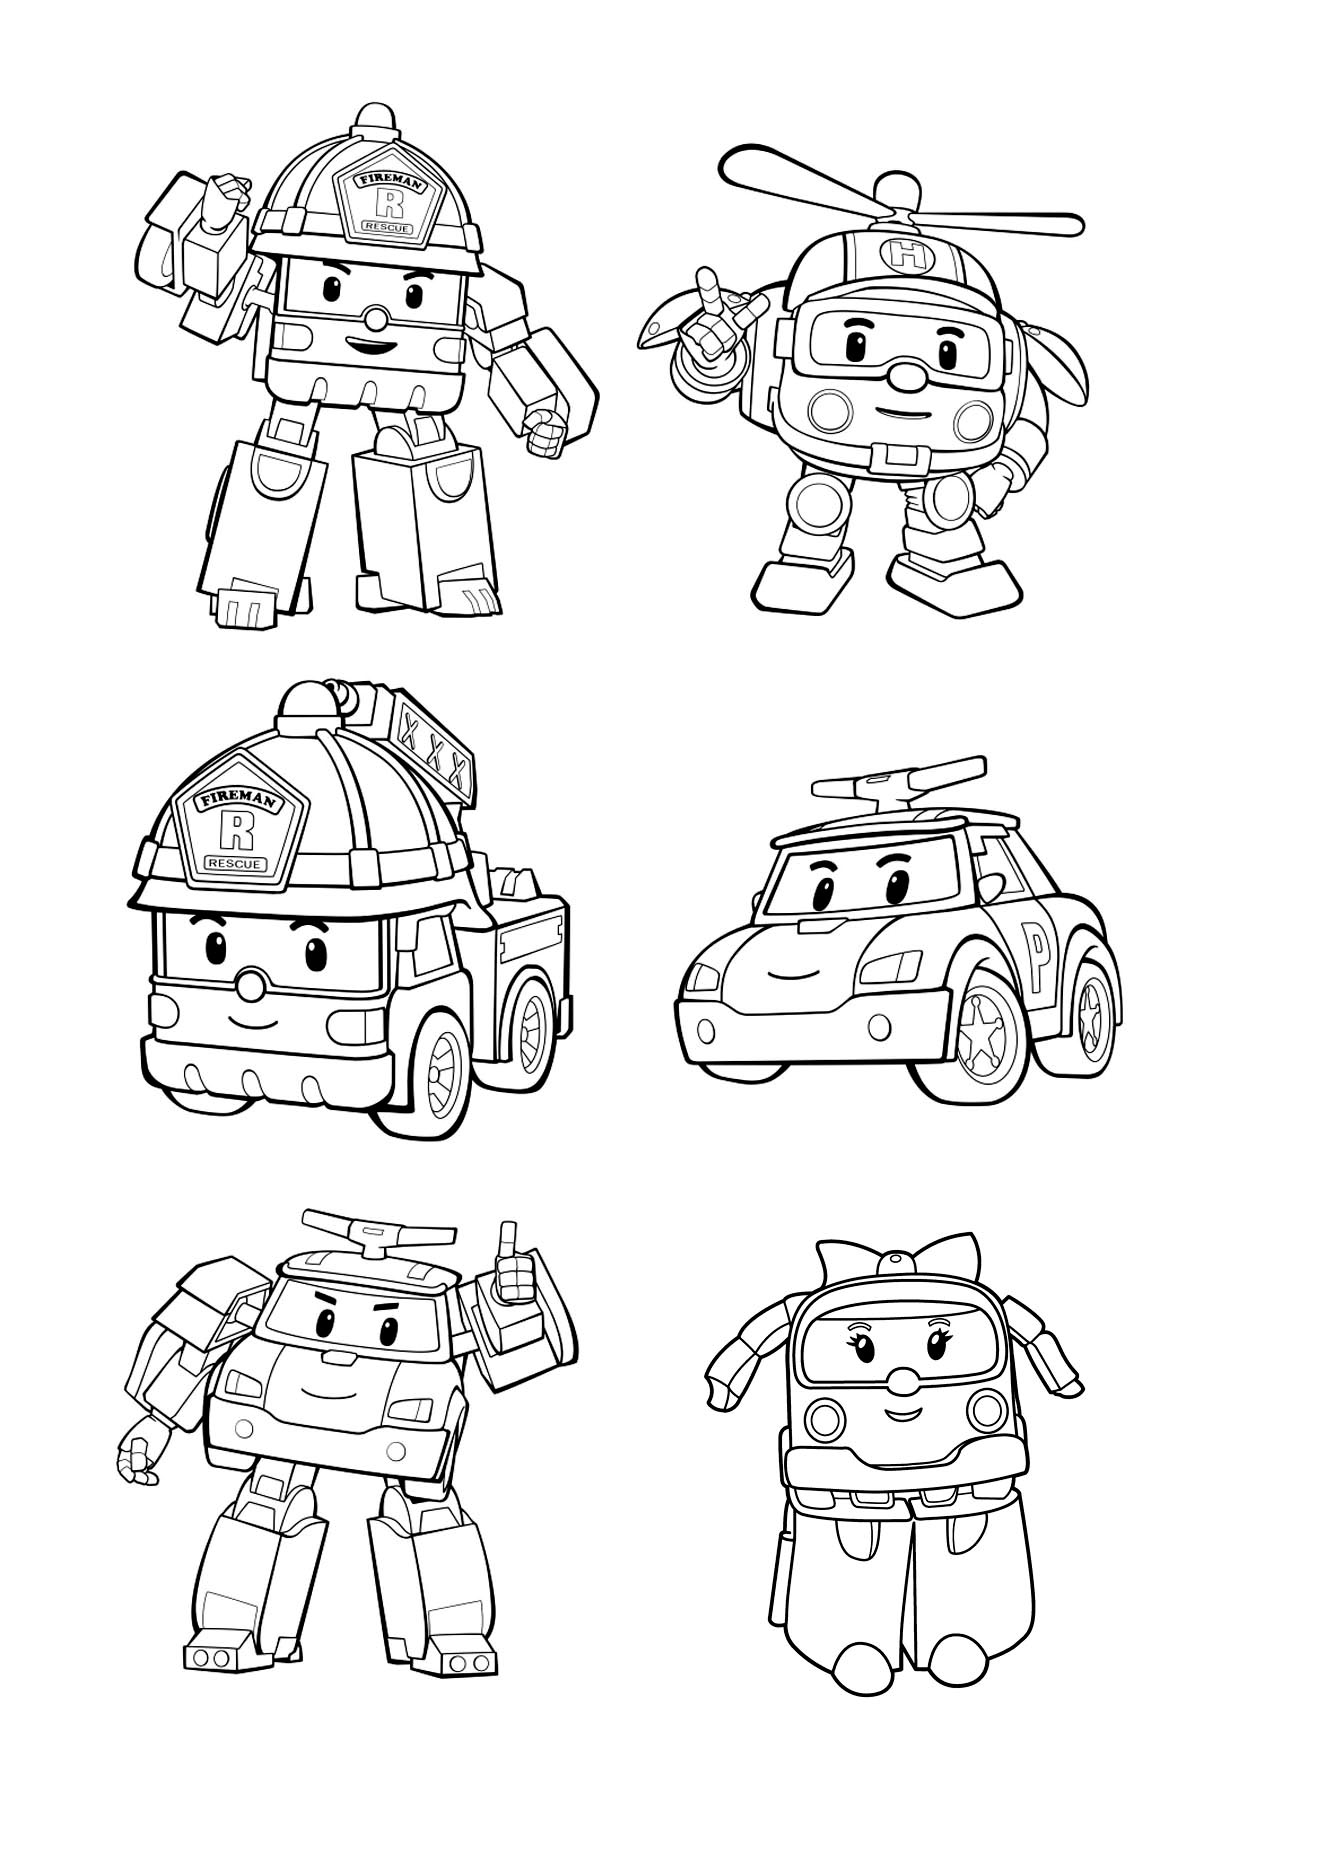 Simple Robocar Poli coloring page for kids